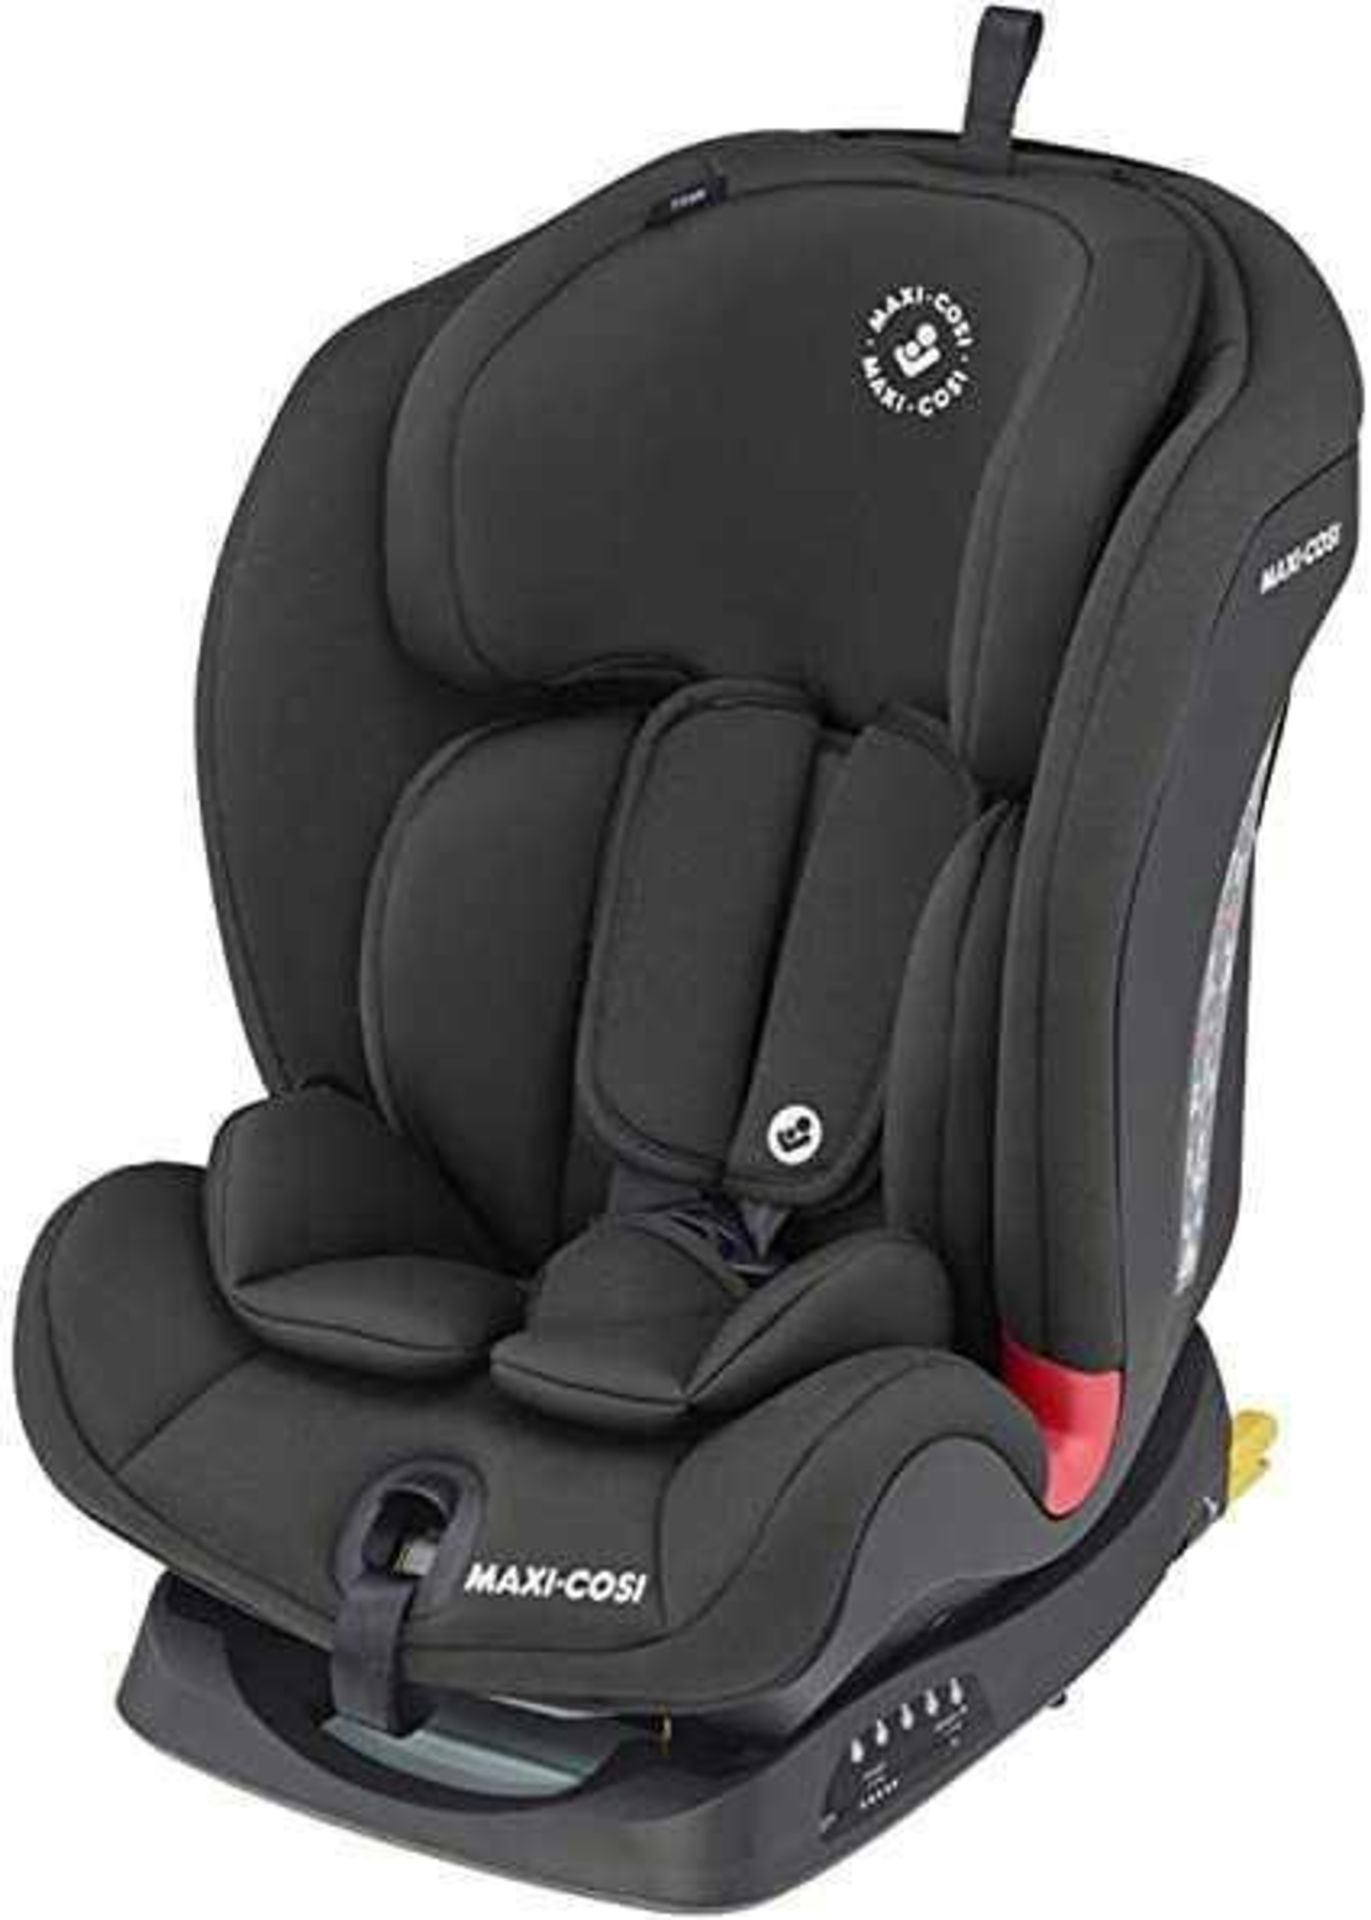 Rrp £160 Maxi Cosi Titan Group 1 2 And 3 In Car Children'S Safety Seat In Nomad Black